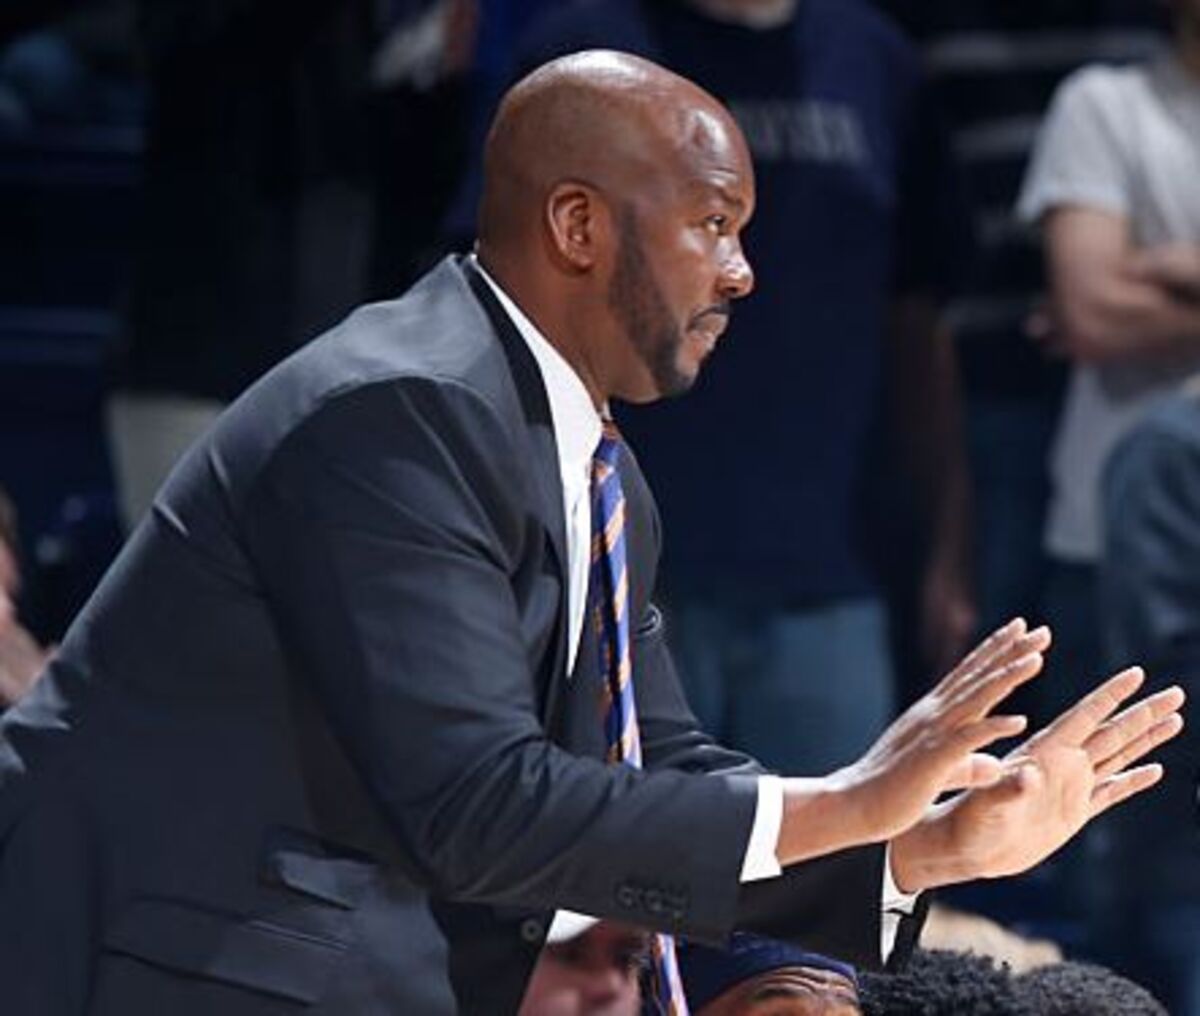 FBI NCAA basketball scandal: Chuck Person, Adidas, what else we know